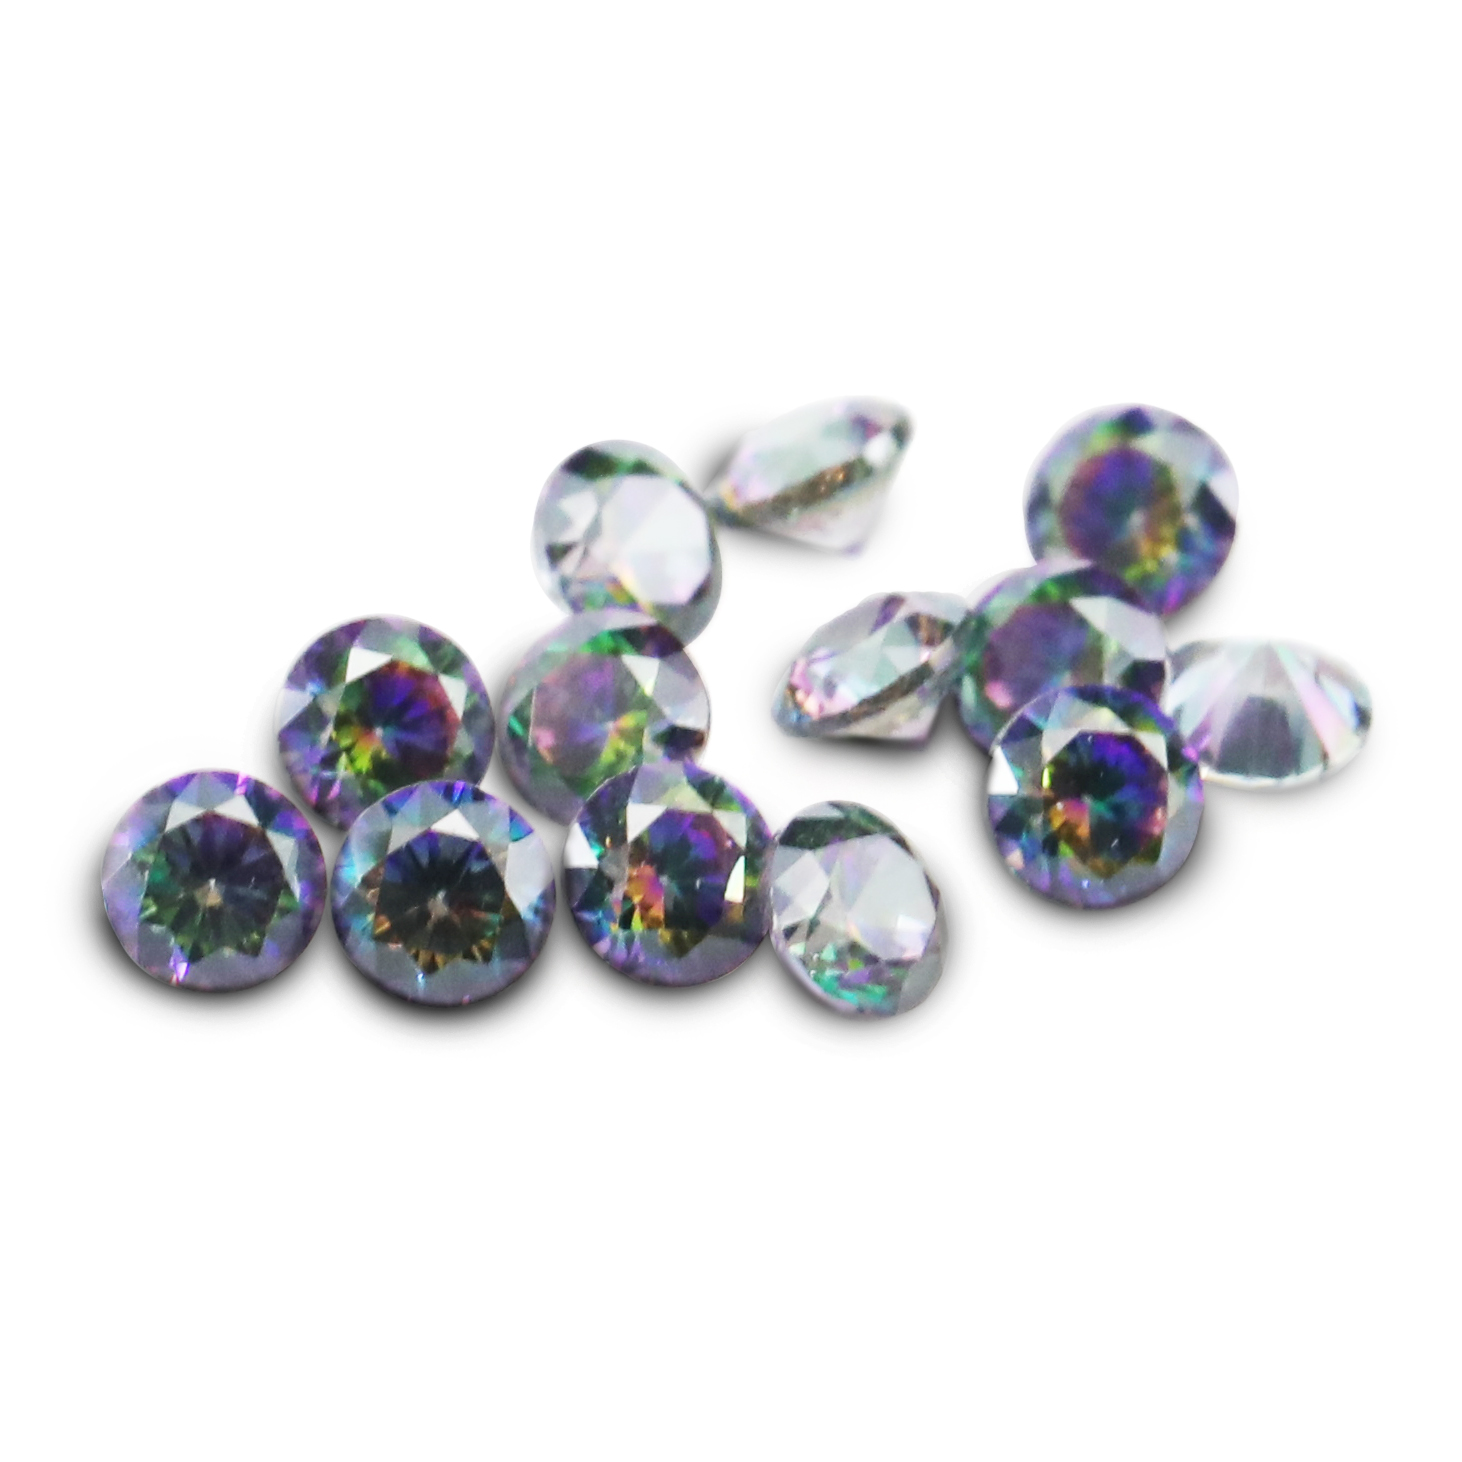 5Pcs January February April June August October November Imitation Birthstone Round Faceted Cubic Zirconia CZ Stone DIY Loose Stone Supplies 4110183-1 - Click Image to Close